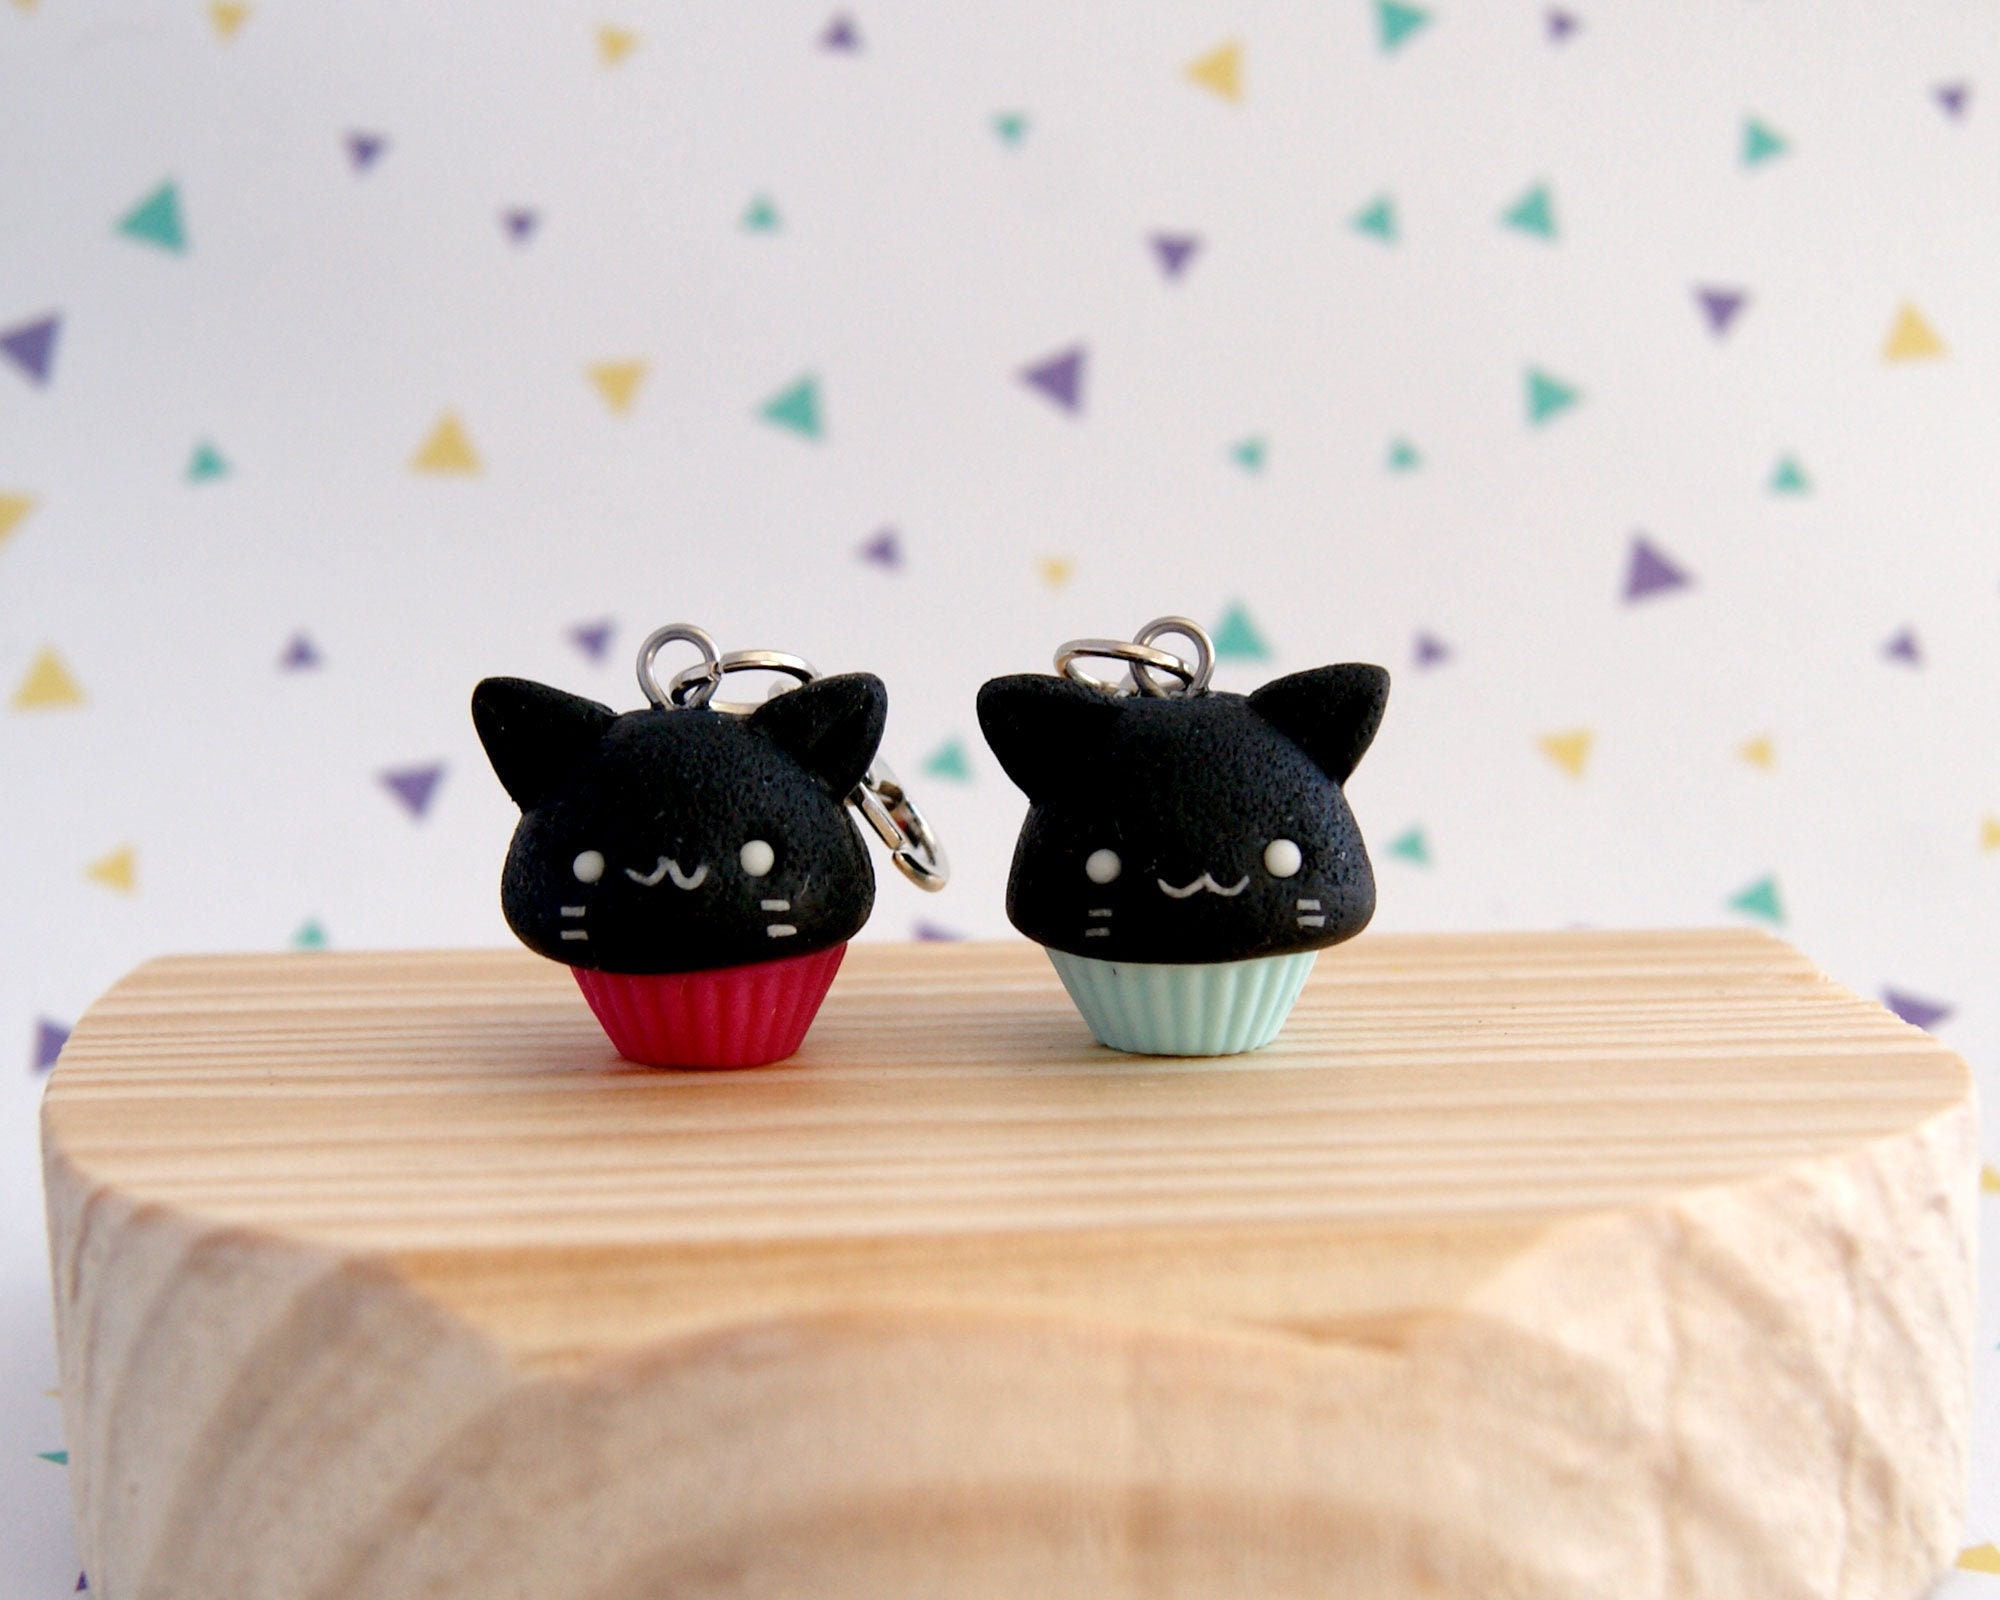 Kawaii Cat Charms 20 Pack For DIY Cute Jewelry Making And Fashion